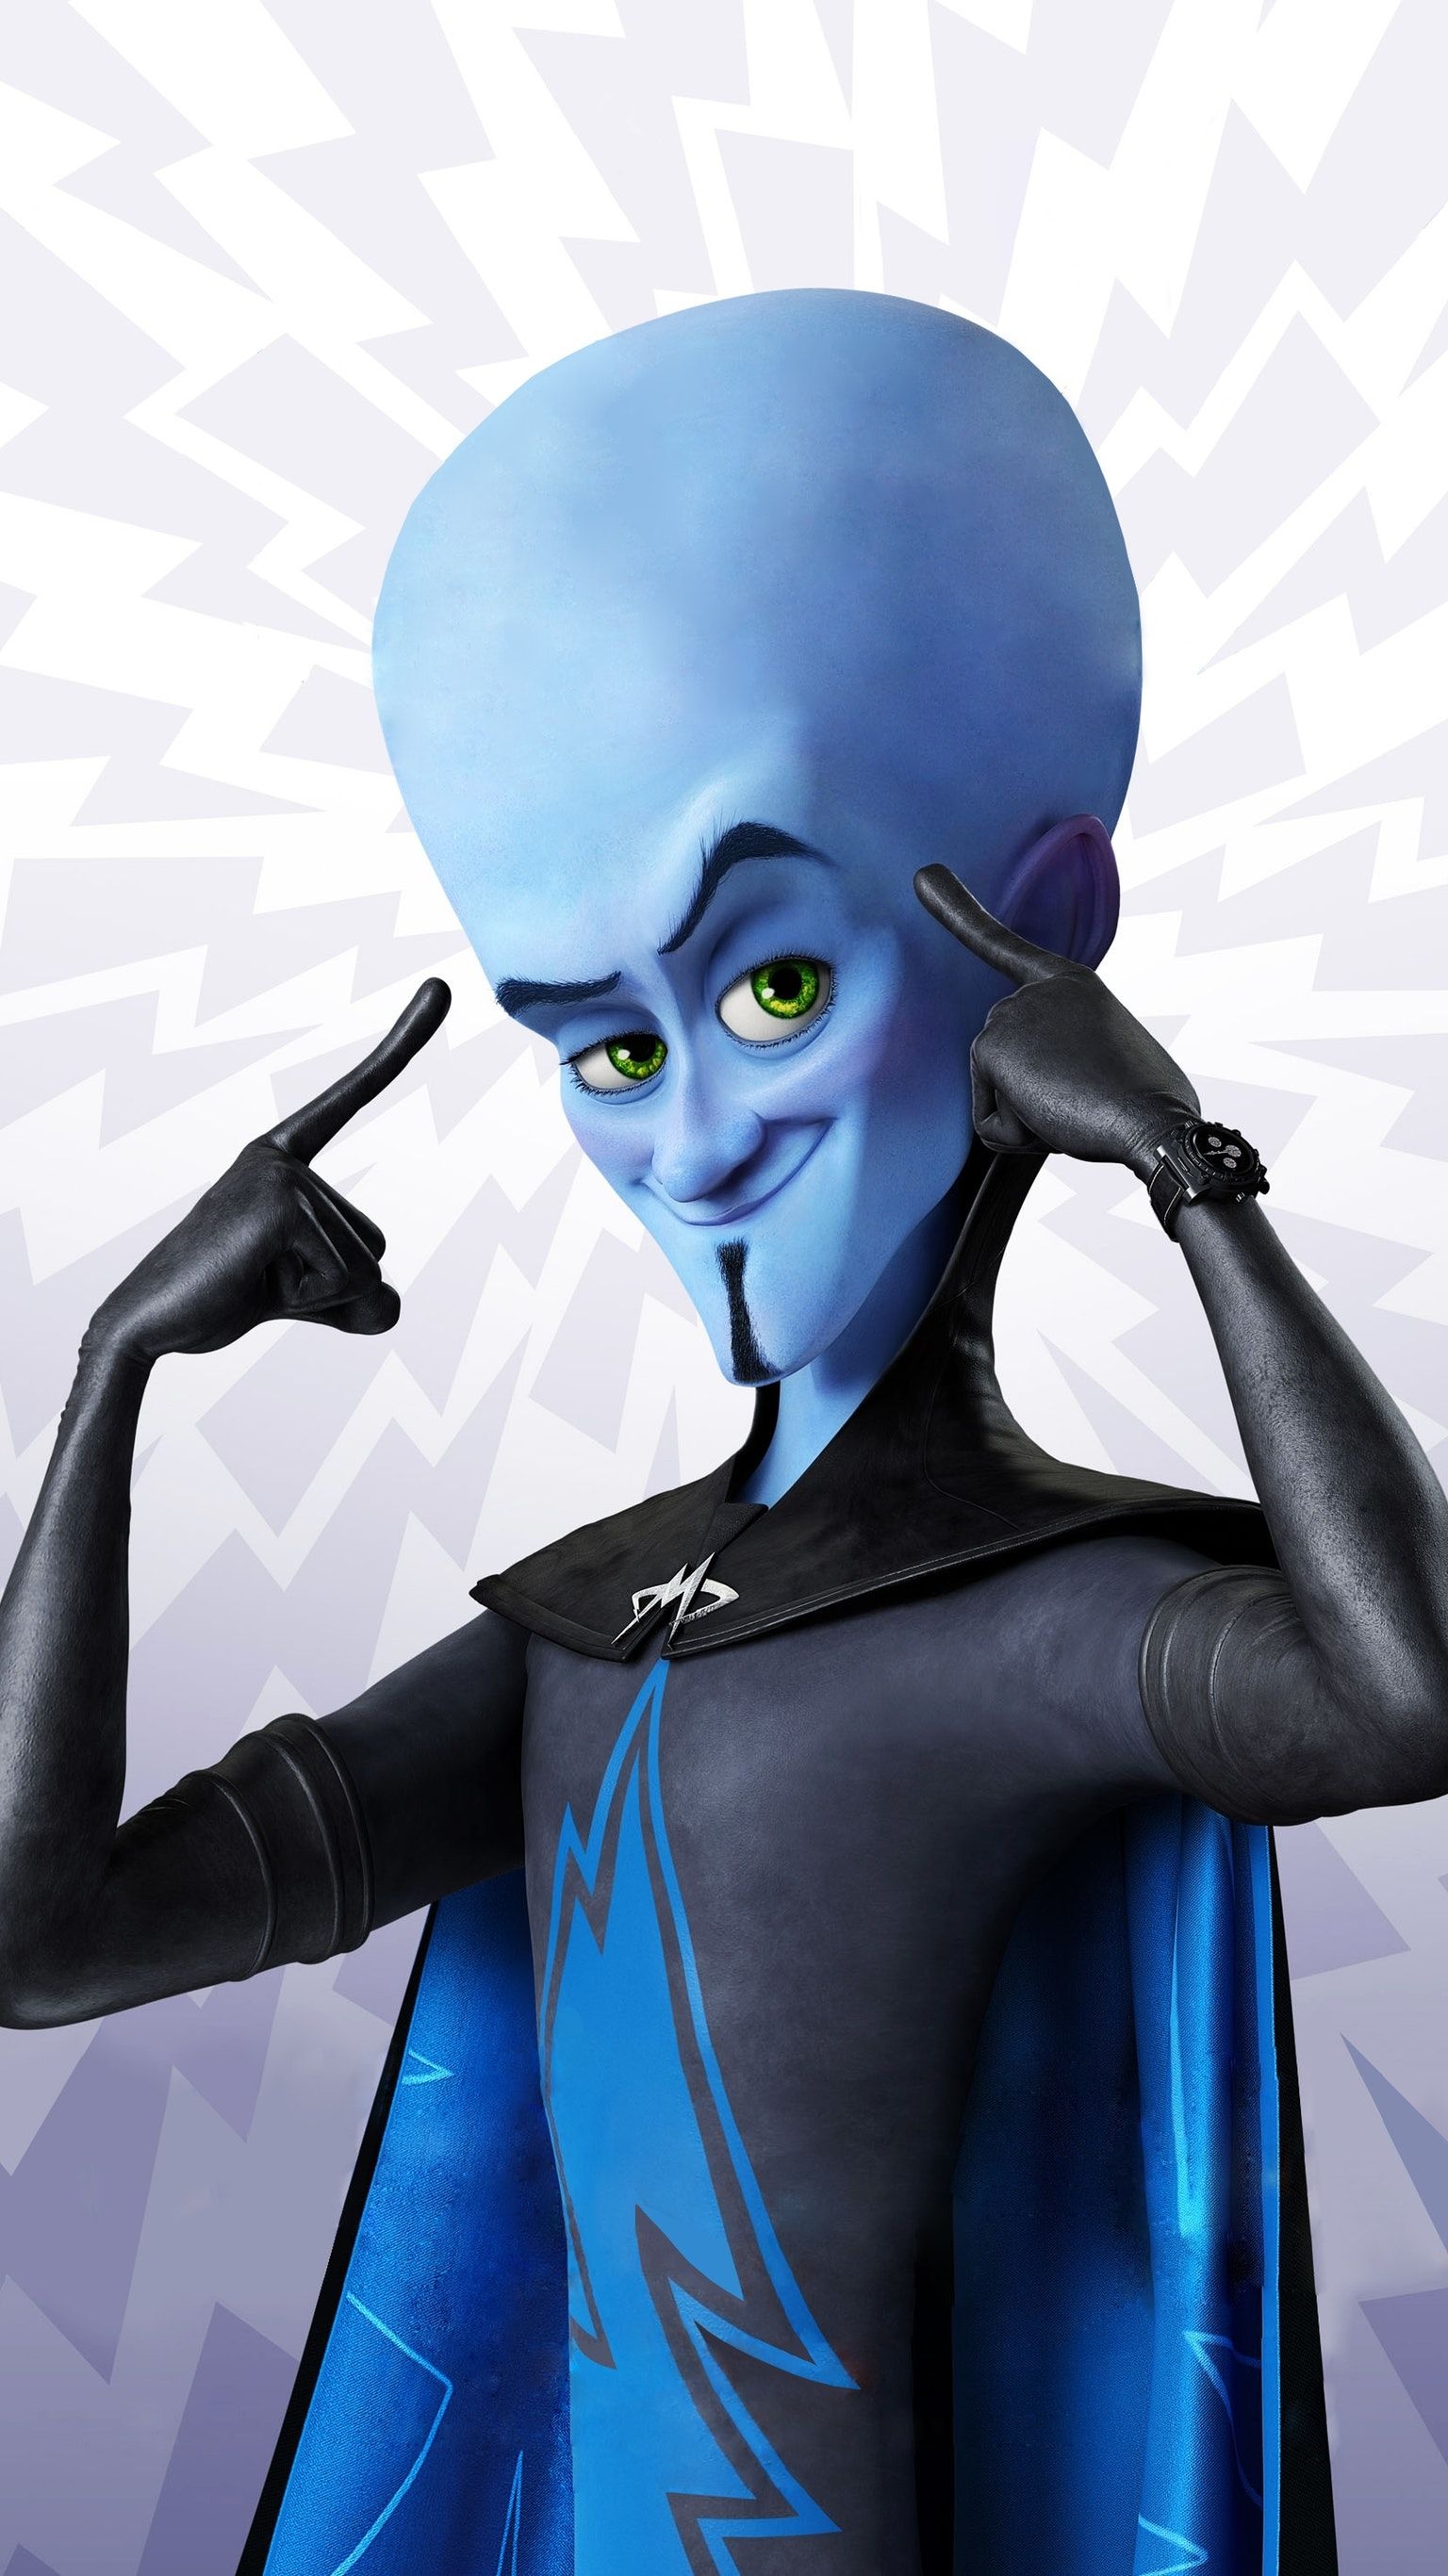 Megamind 2010 phone wallpaper, Moviemania collection, Animated character wallpapers, Cute cartoon art, 1540x2740 HD Phone